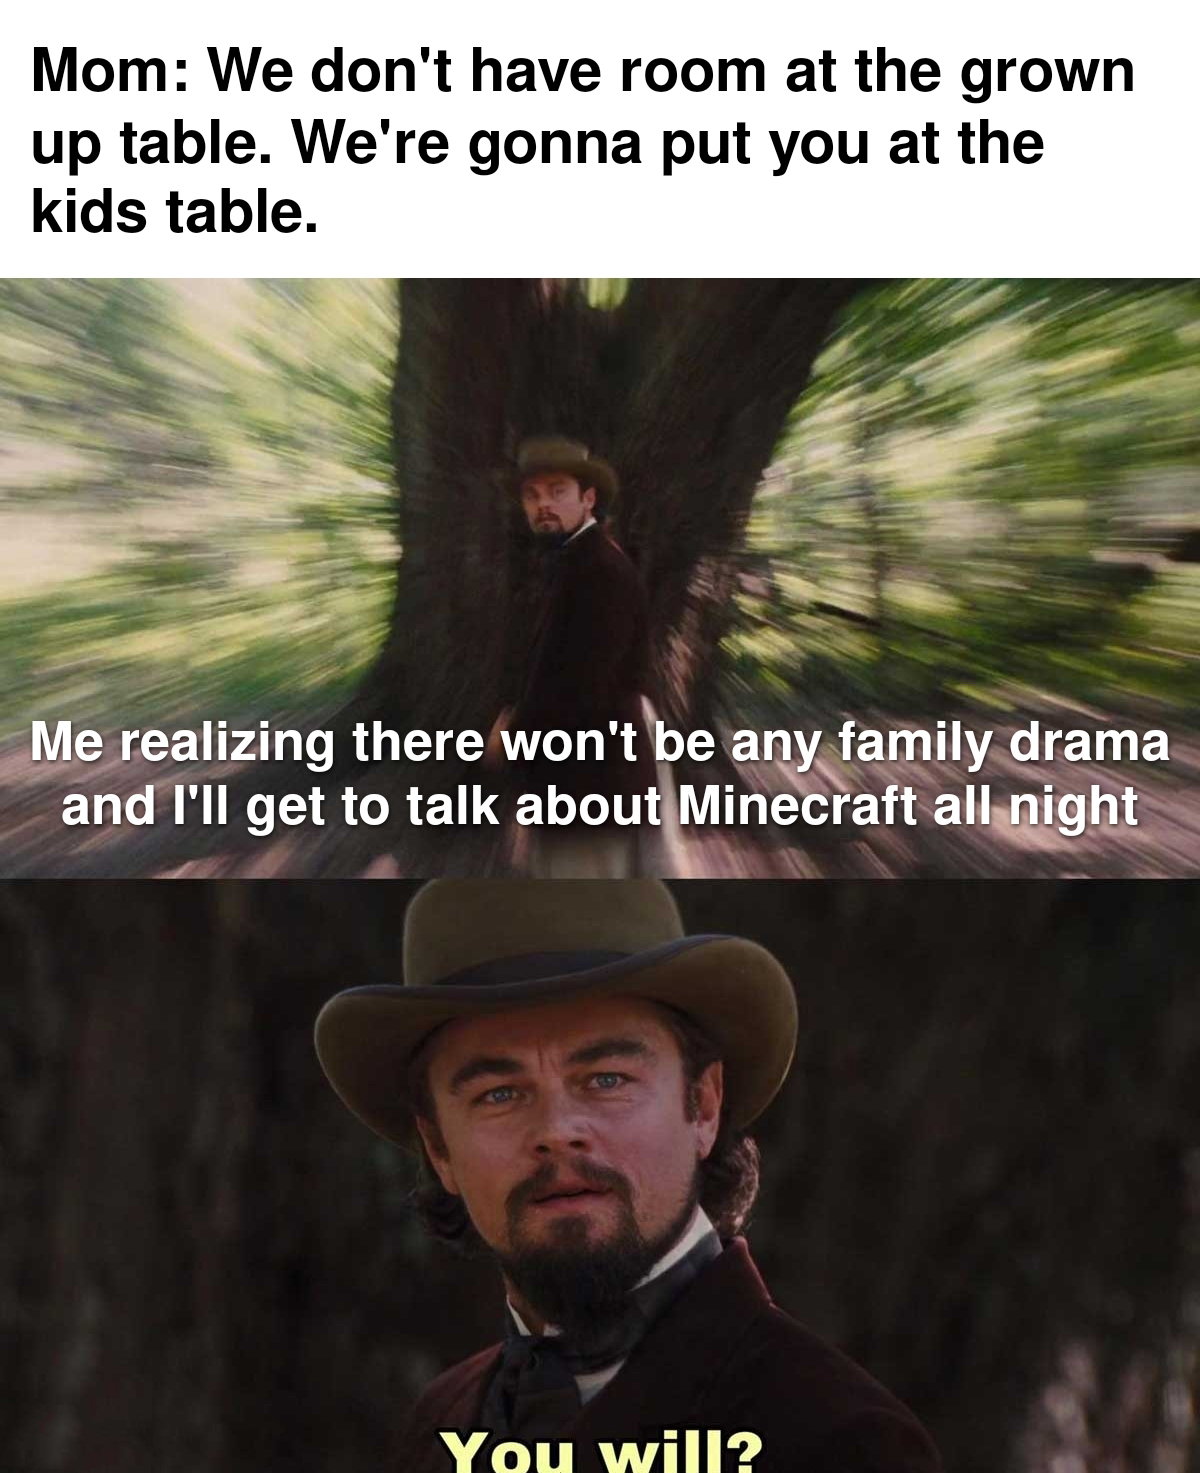 dank memes - funny memes - ohio state fight song - Mom We don't have room at the grown up table. We're gonna put you at the kids table. Me realizing there won't be any family drama and I'll get to talk about Minecraft all night You will?